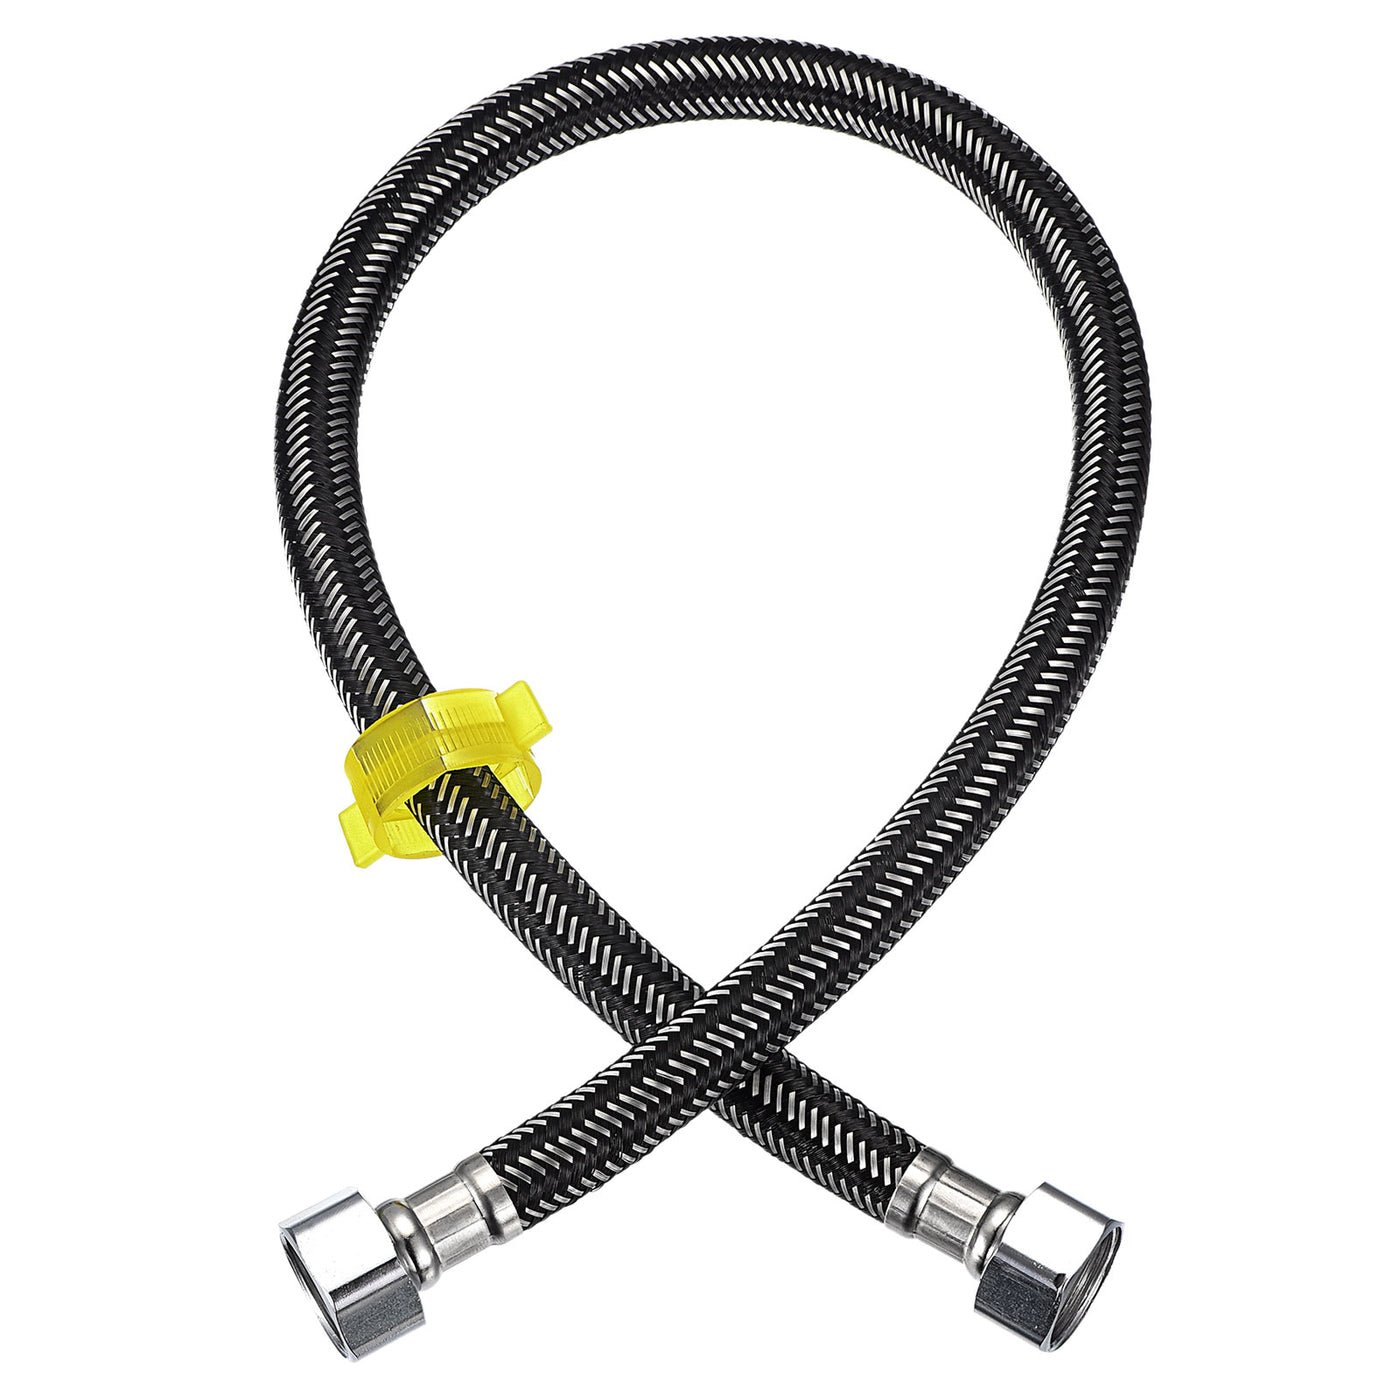 uxcell Uxcell Faucet Supply Line Connector, G1/2 Female x G1/2 Female 24" Hose, Black